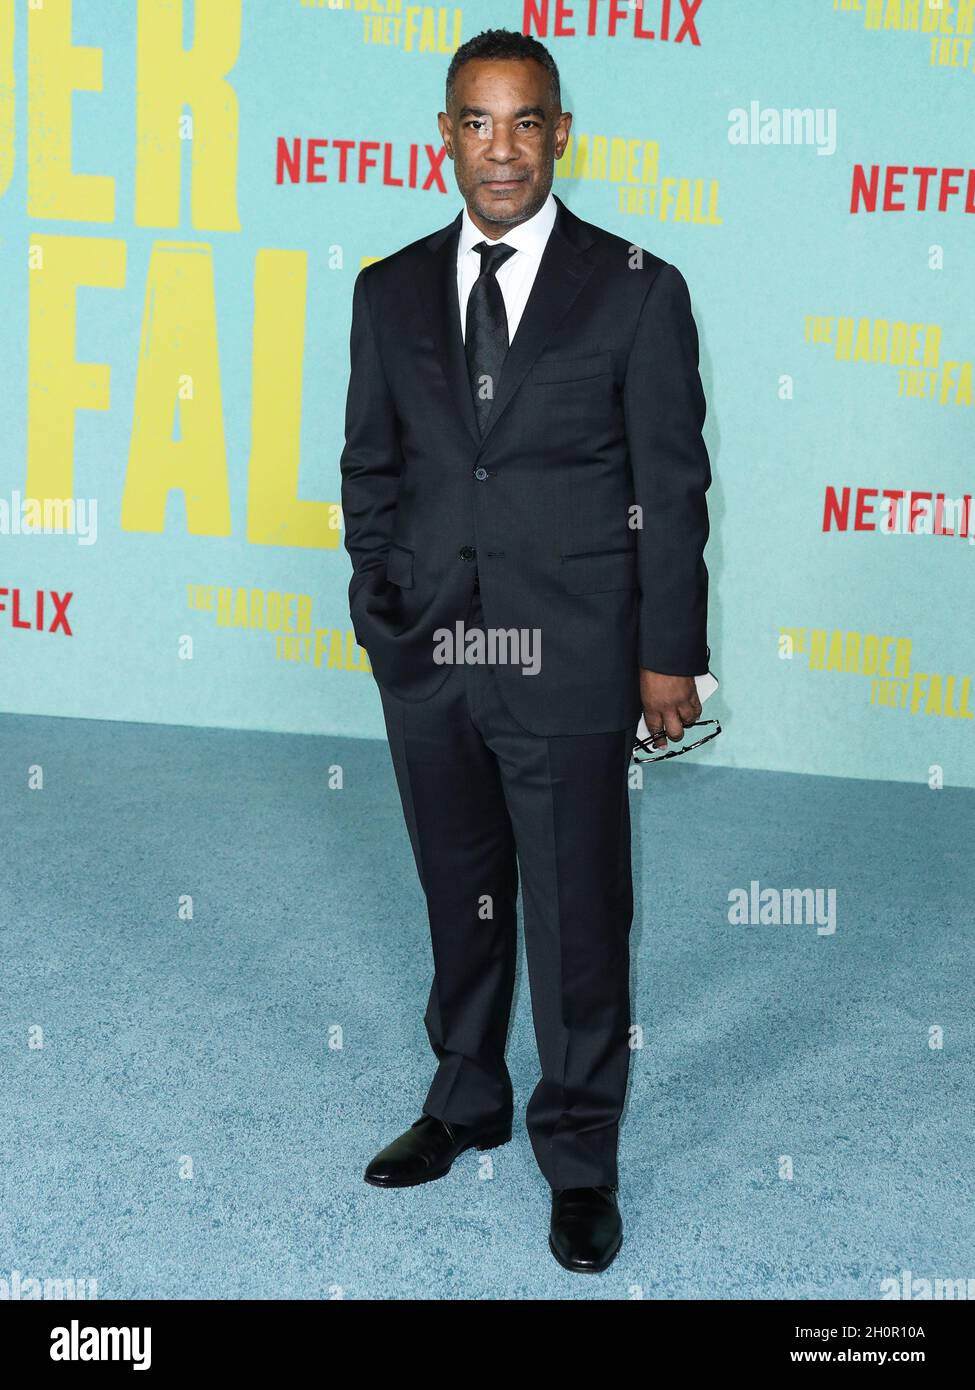 Los Angeles, United States. 13th Oct, 2021. LOS ANGELES, CALIFORNIA, USA - OCTOBER 13: Producer James Lassiter arrives at the Los Angeles Premiere Of Netflix's 'The Harder They Fall' held at the Shrine Auditorium and Expo Hall on October 13, 2021 in Los Angeles, California, United States. (Photo by Xavier Collin/Image Press Agency) Credit: Image Press Agency/Alamy Live News Stock Photo